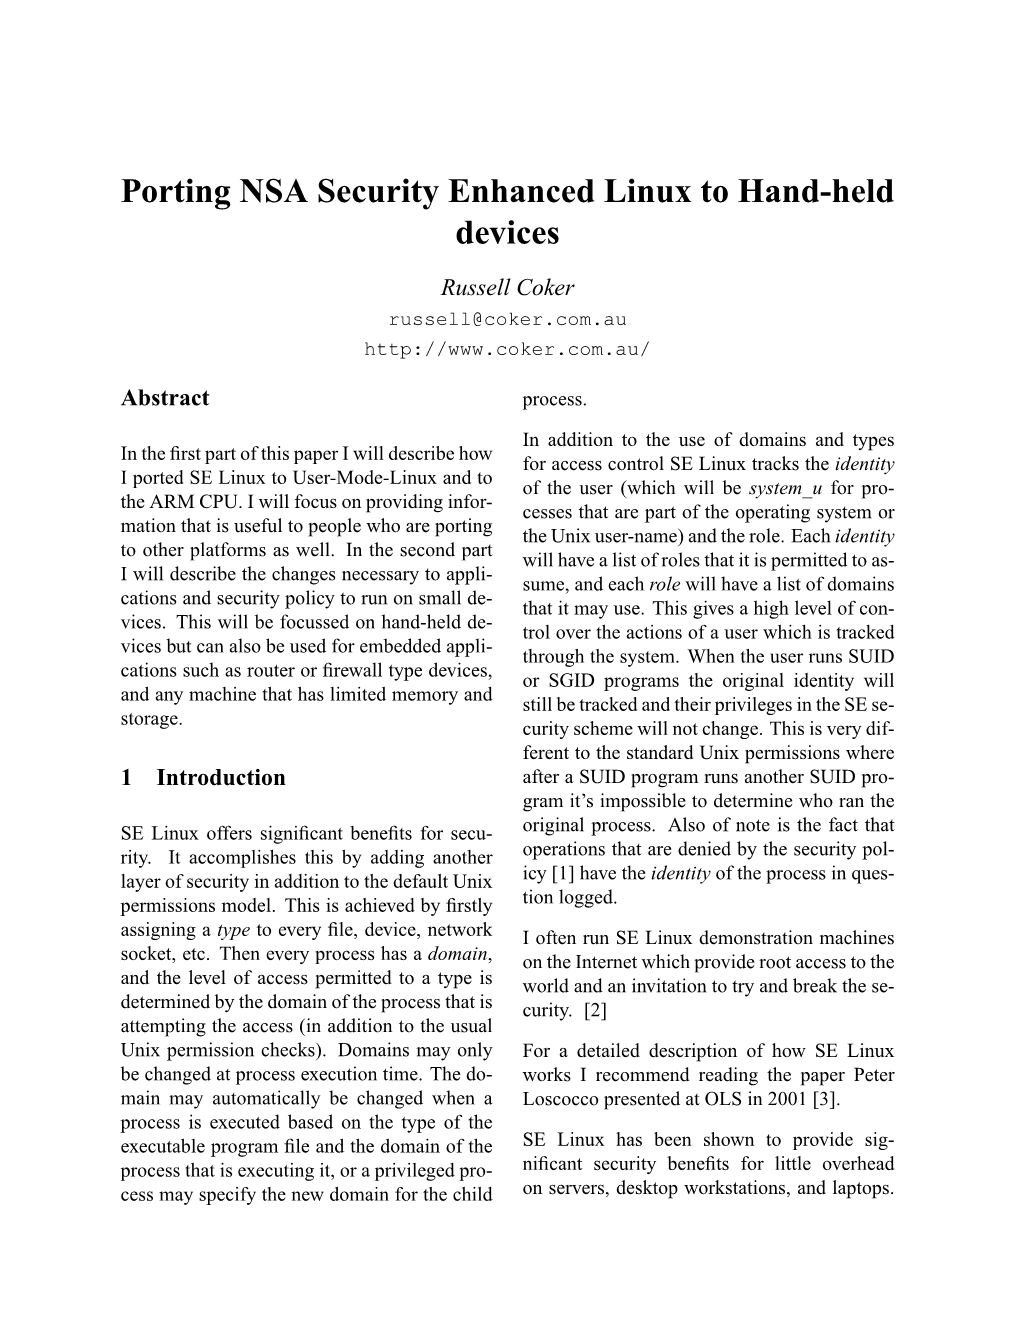 Porting NSA Security Enhanced Linux to Hand-Held Devices